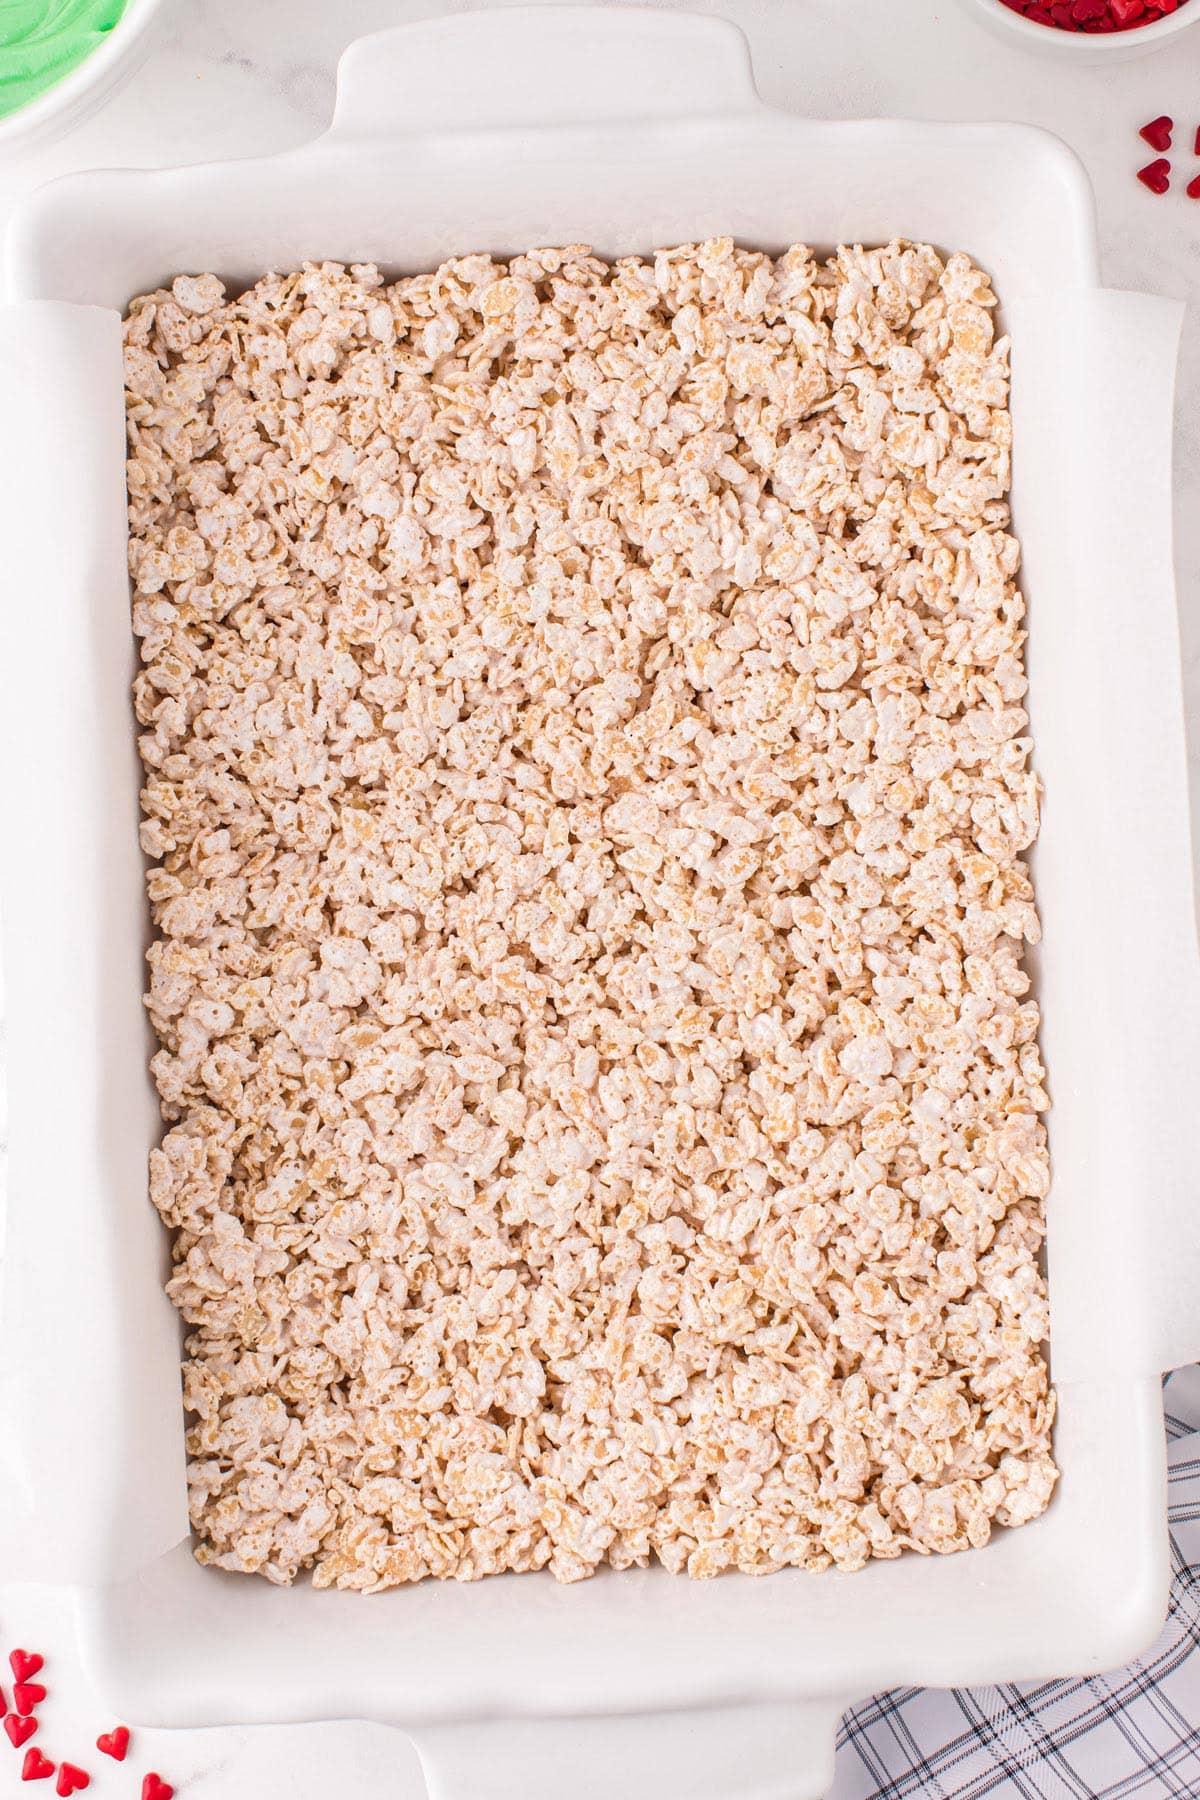 pour the Rice Krispies mixture into the pan